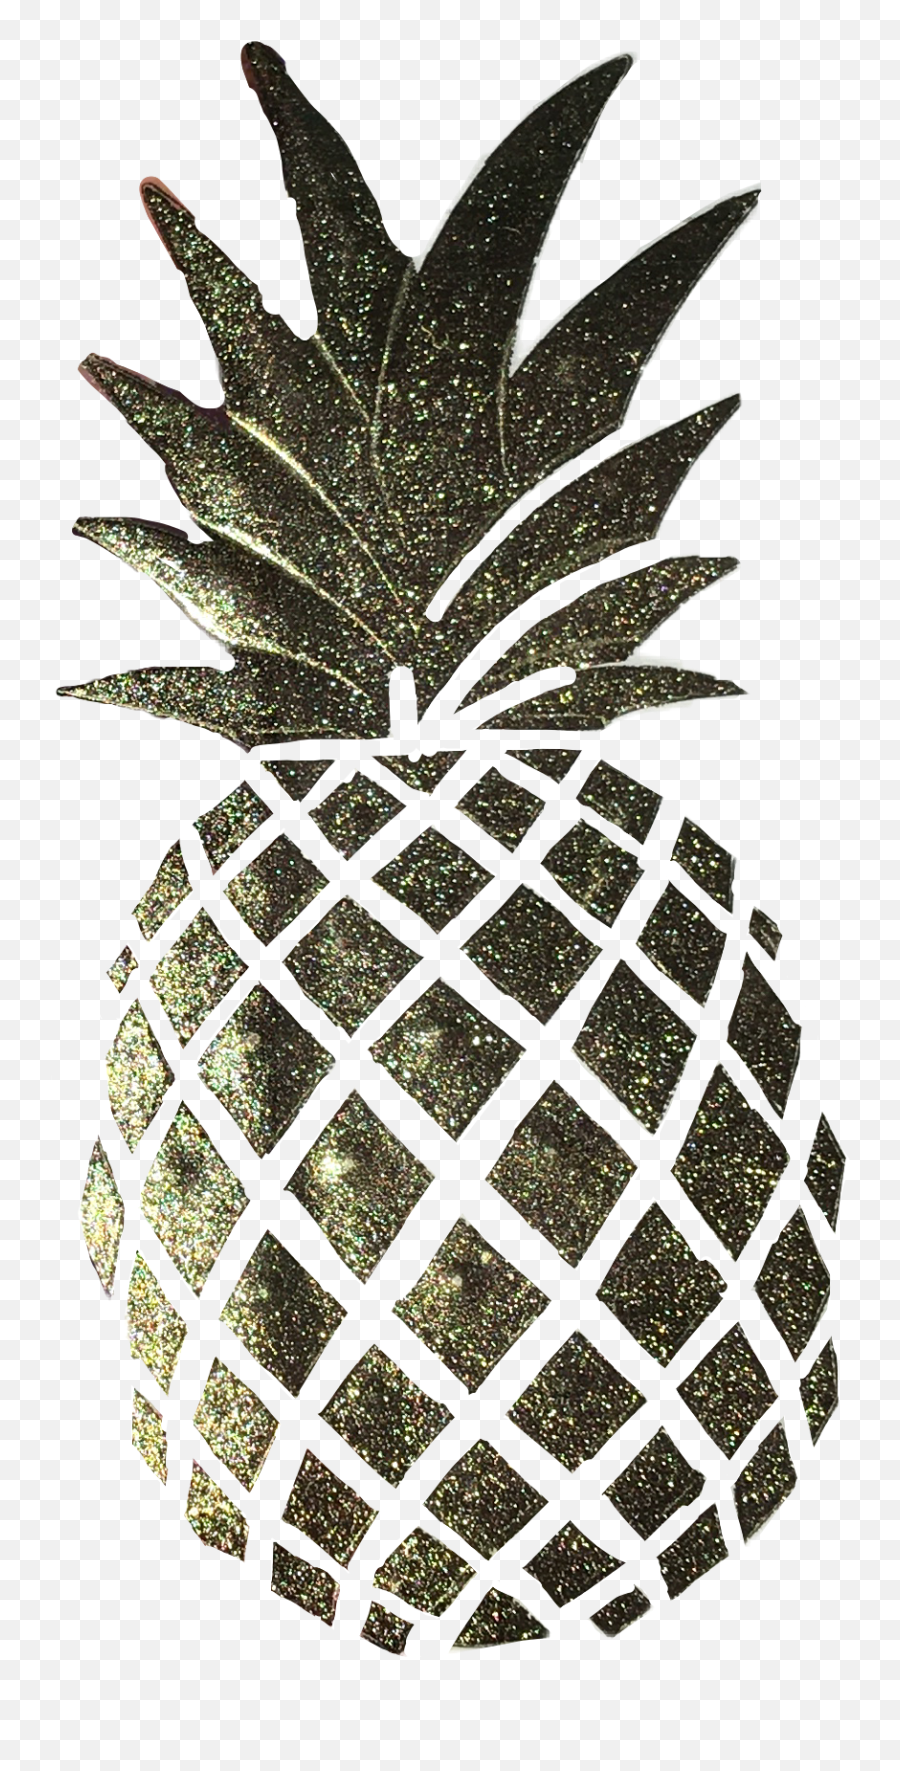 The Coolest Pineapple Stickers Emoji,Avocado And Pineapple Emojis Together